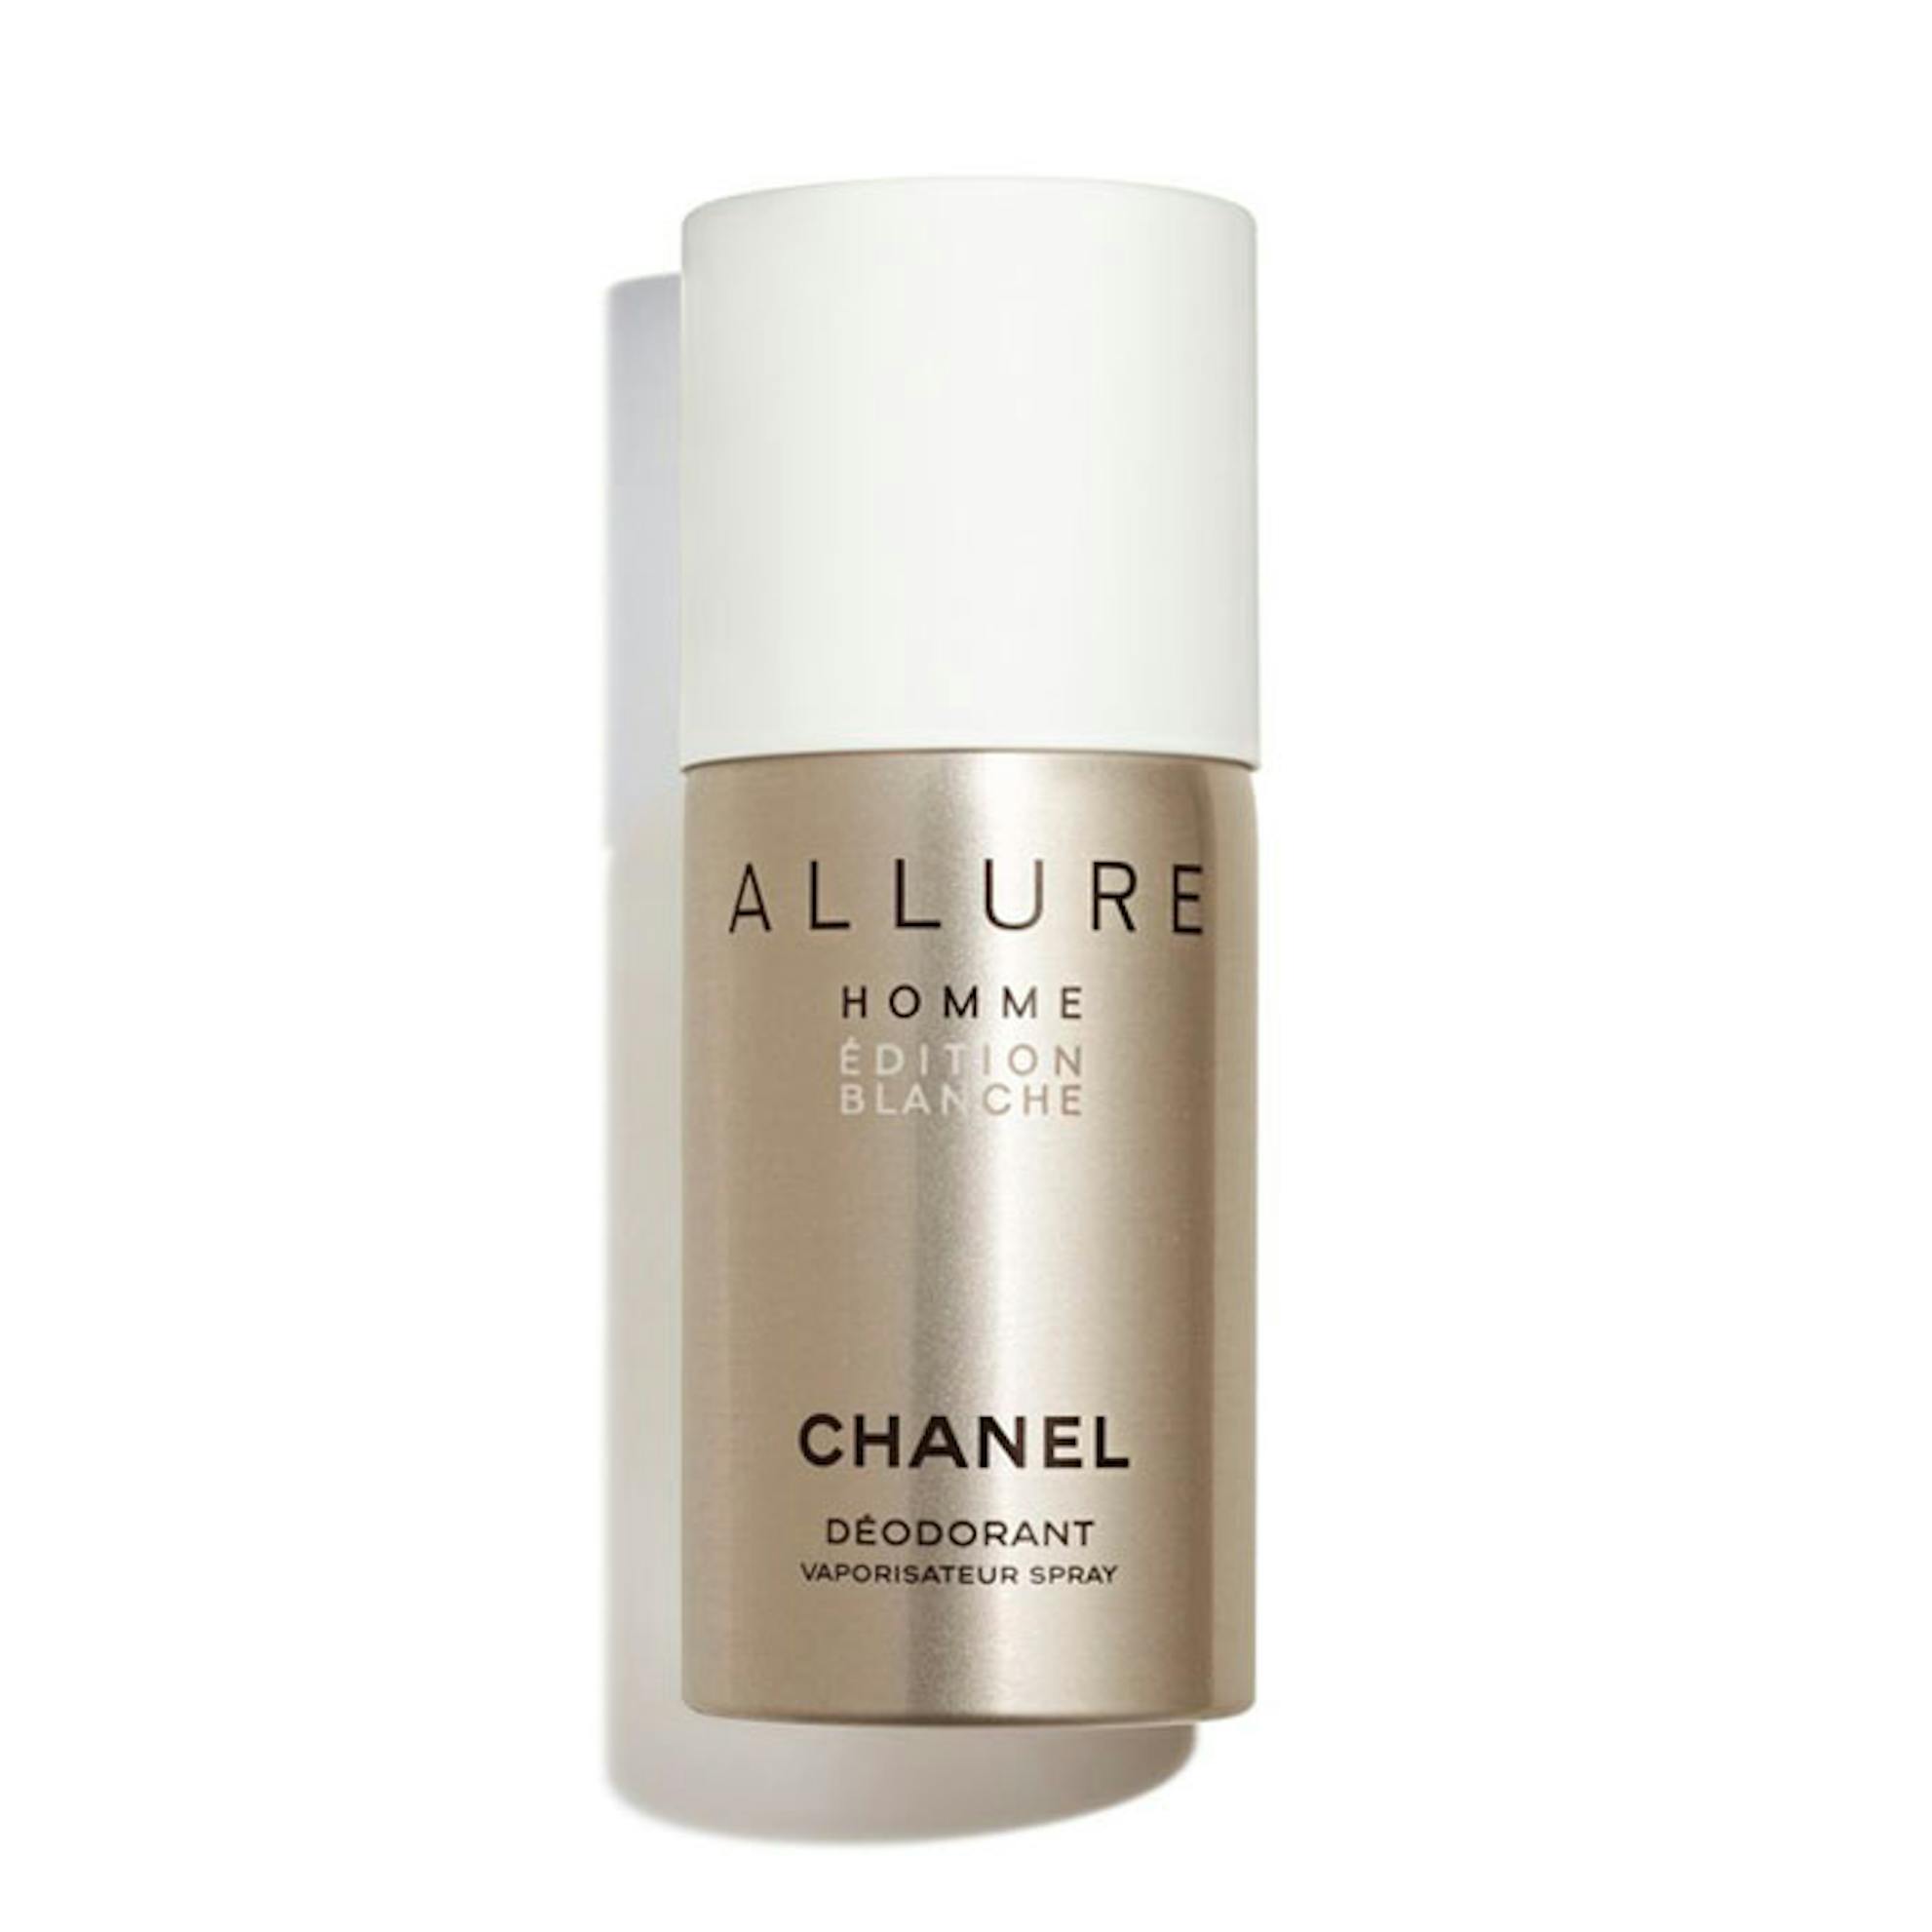 CHANEL Allure Homme Édition Blanche 100ml Deodorant